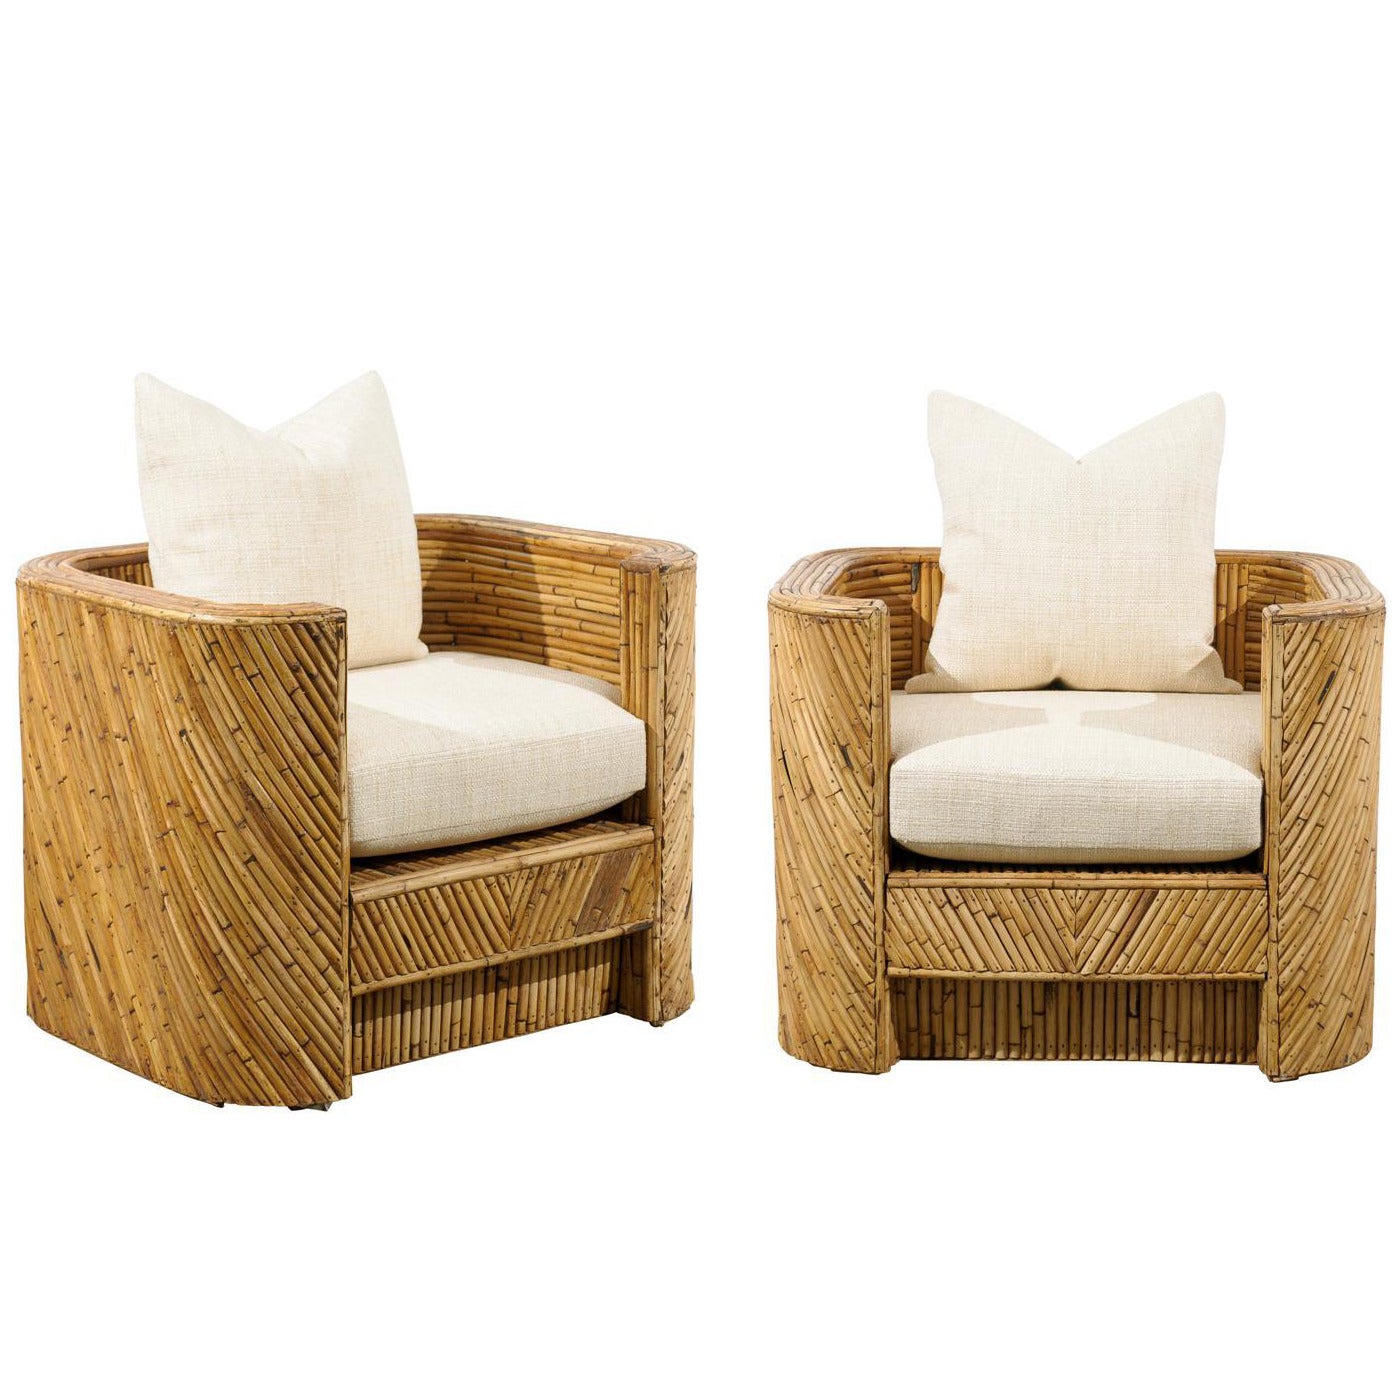 Pair of Split Bamboo Chairs